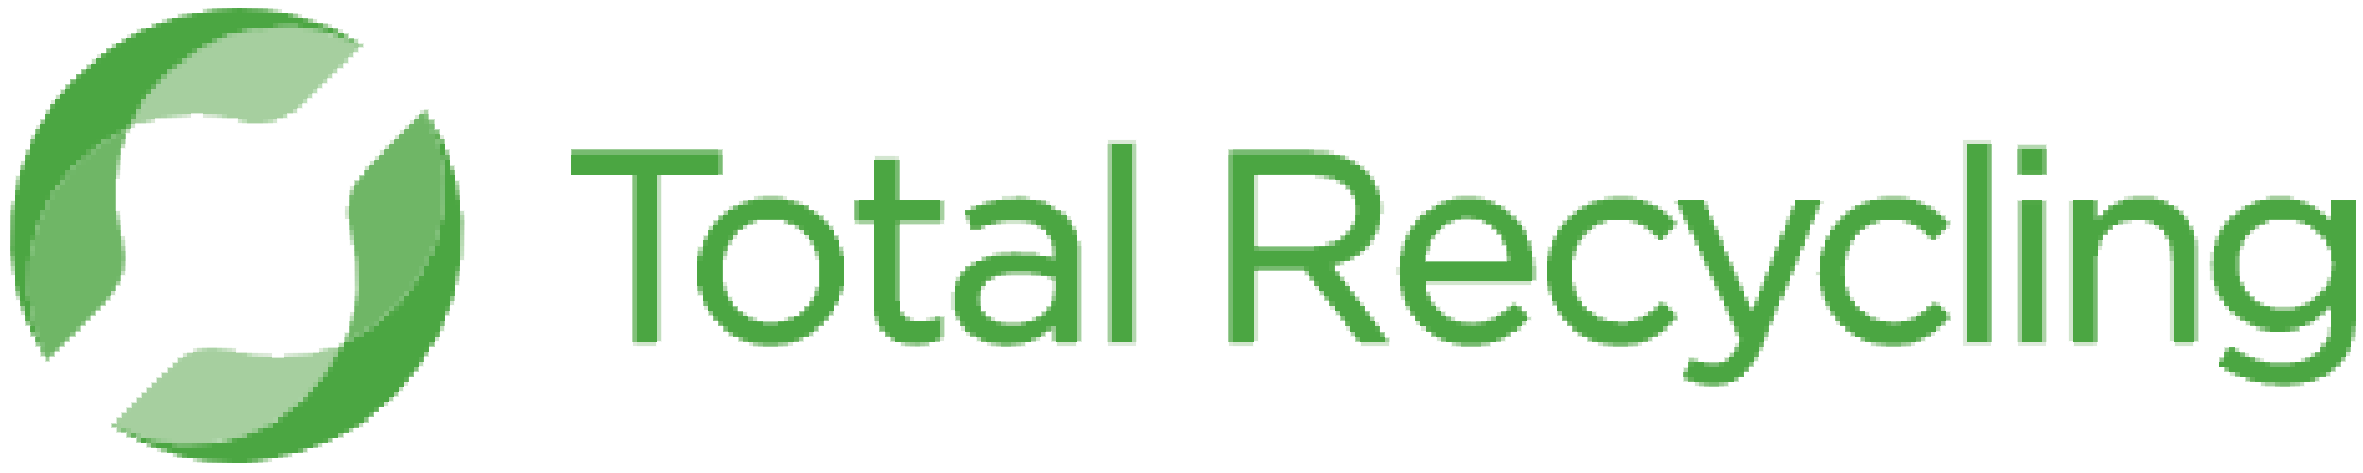 Total Recycling logo